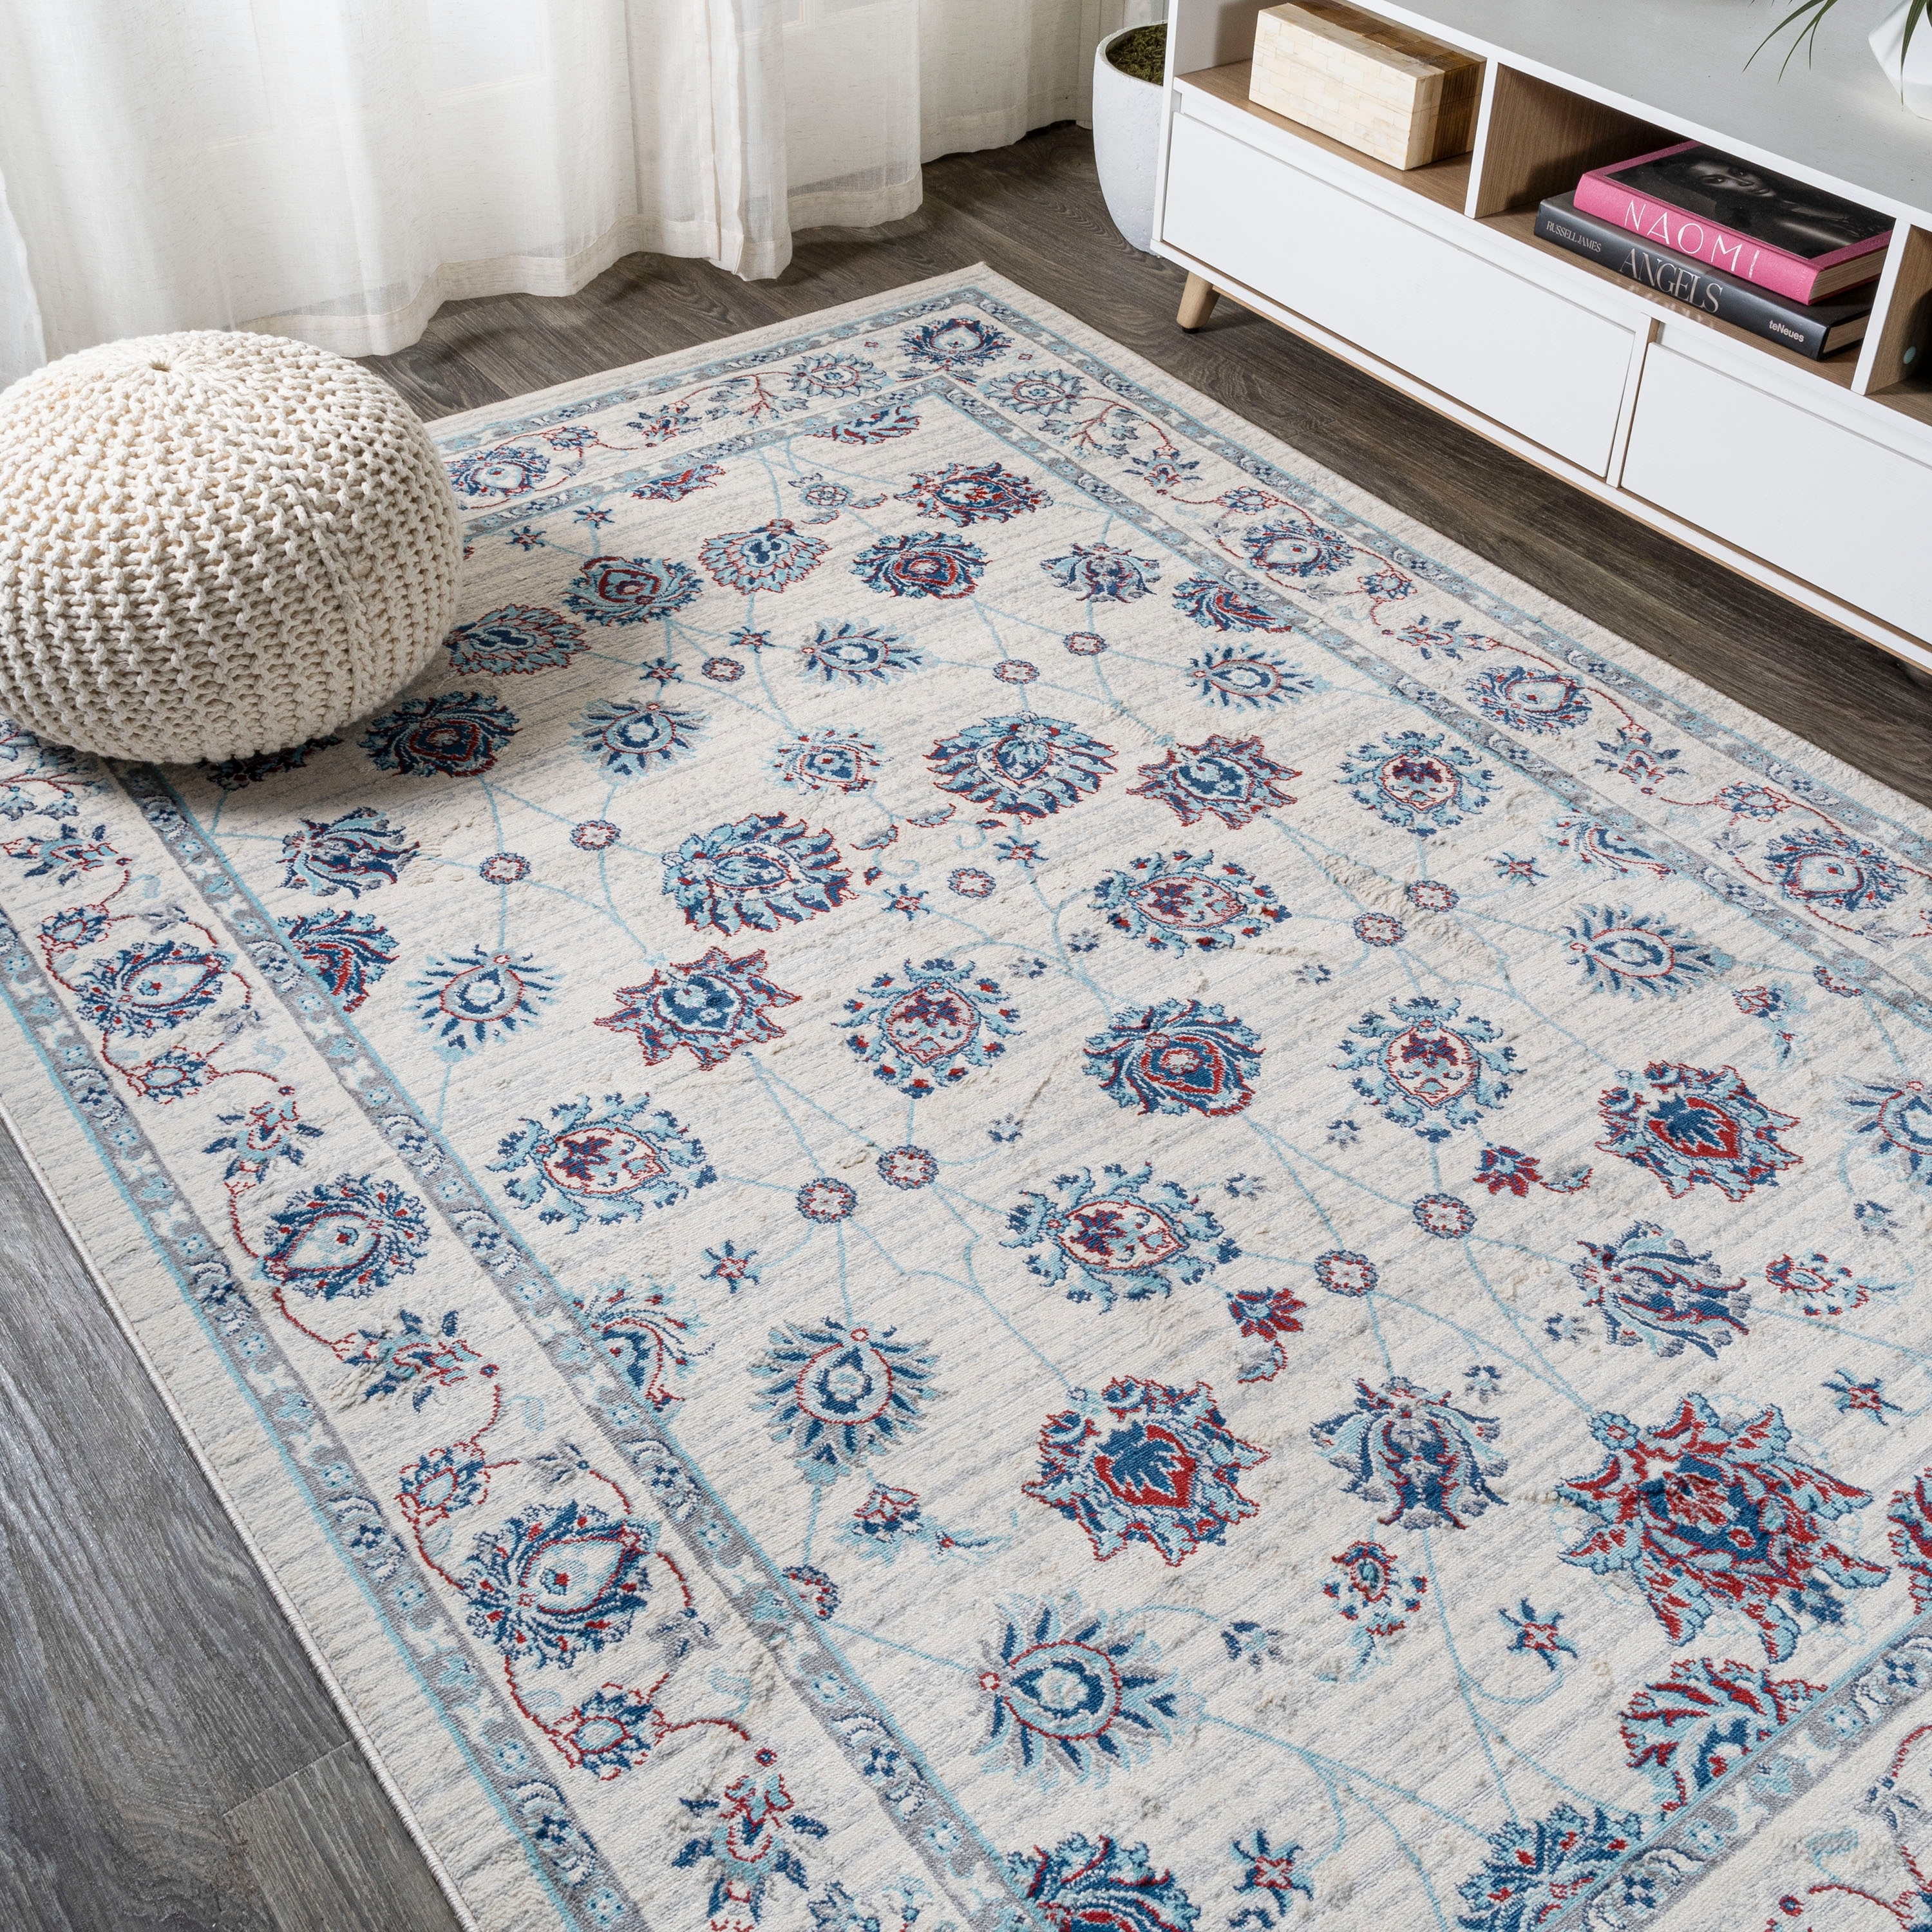 https://ak1.ostkcdn.com/images/products/is/images/direct/e0e72d6b4d52b93c559cda14ef98da9bf6ad399b/JONATHAN-Y-Modern-Persian-Vintage-Medallion-Distressed-Area-Rug.jpg